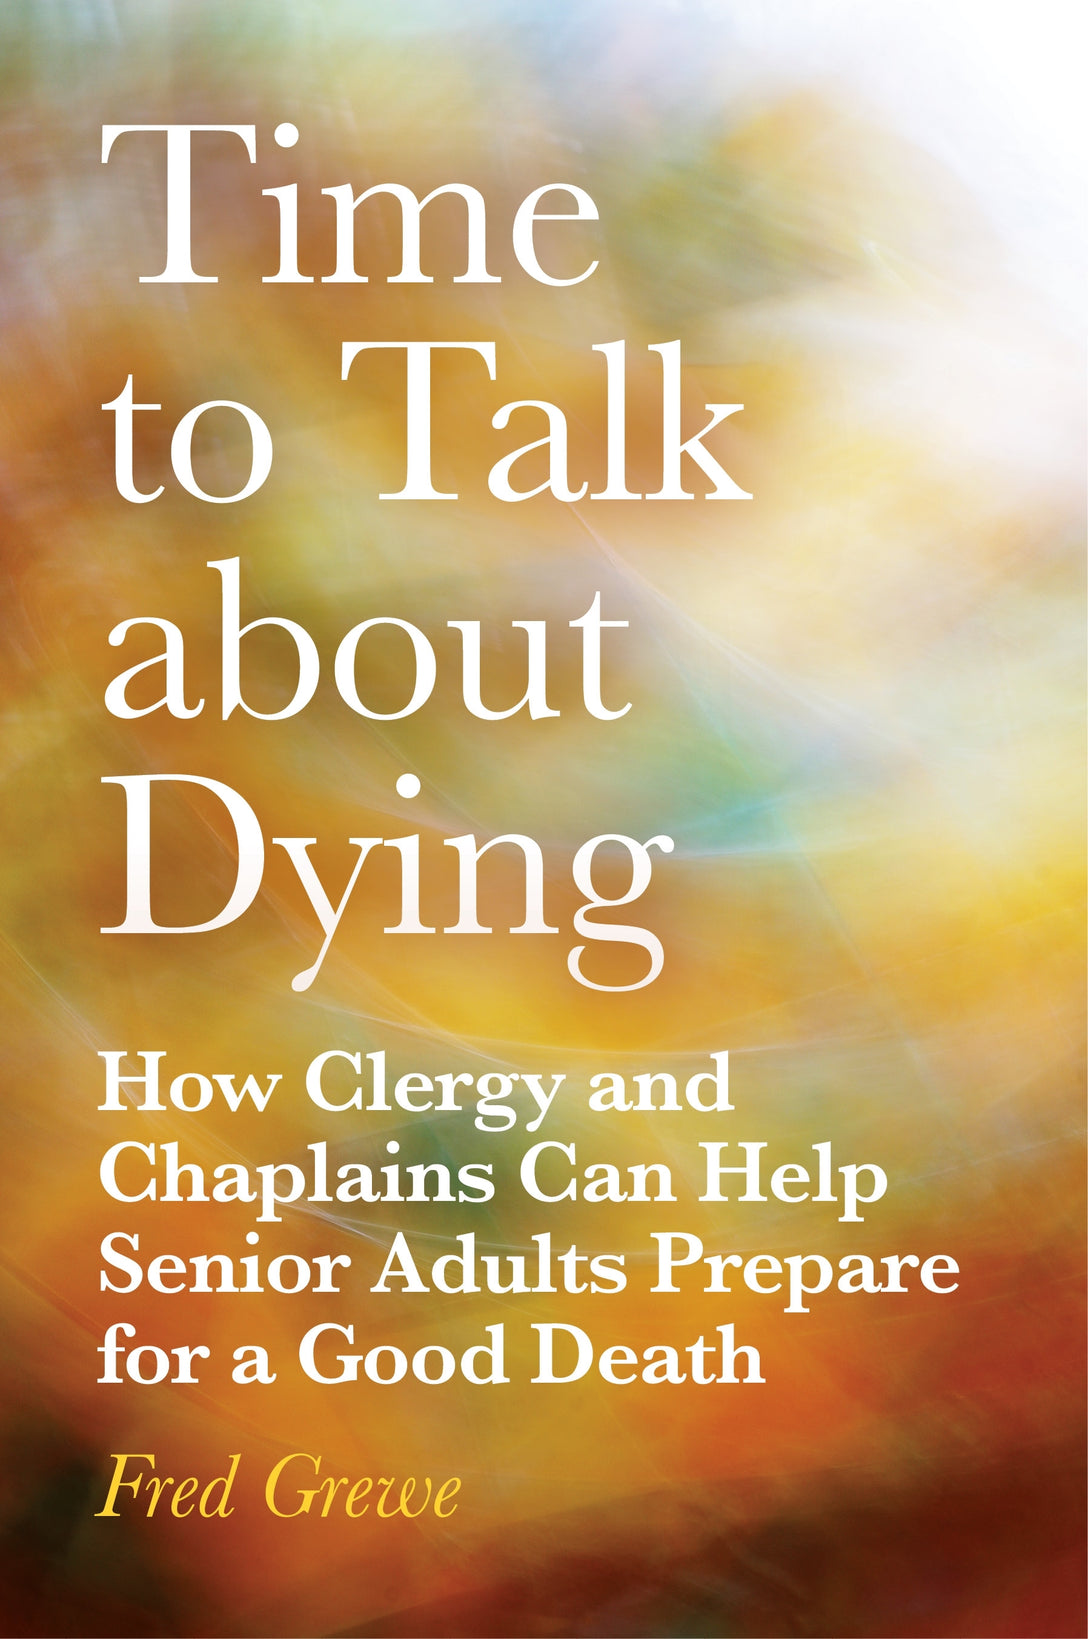 Time to Talk about Dying by Fred Grewe